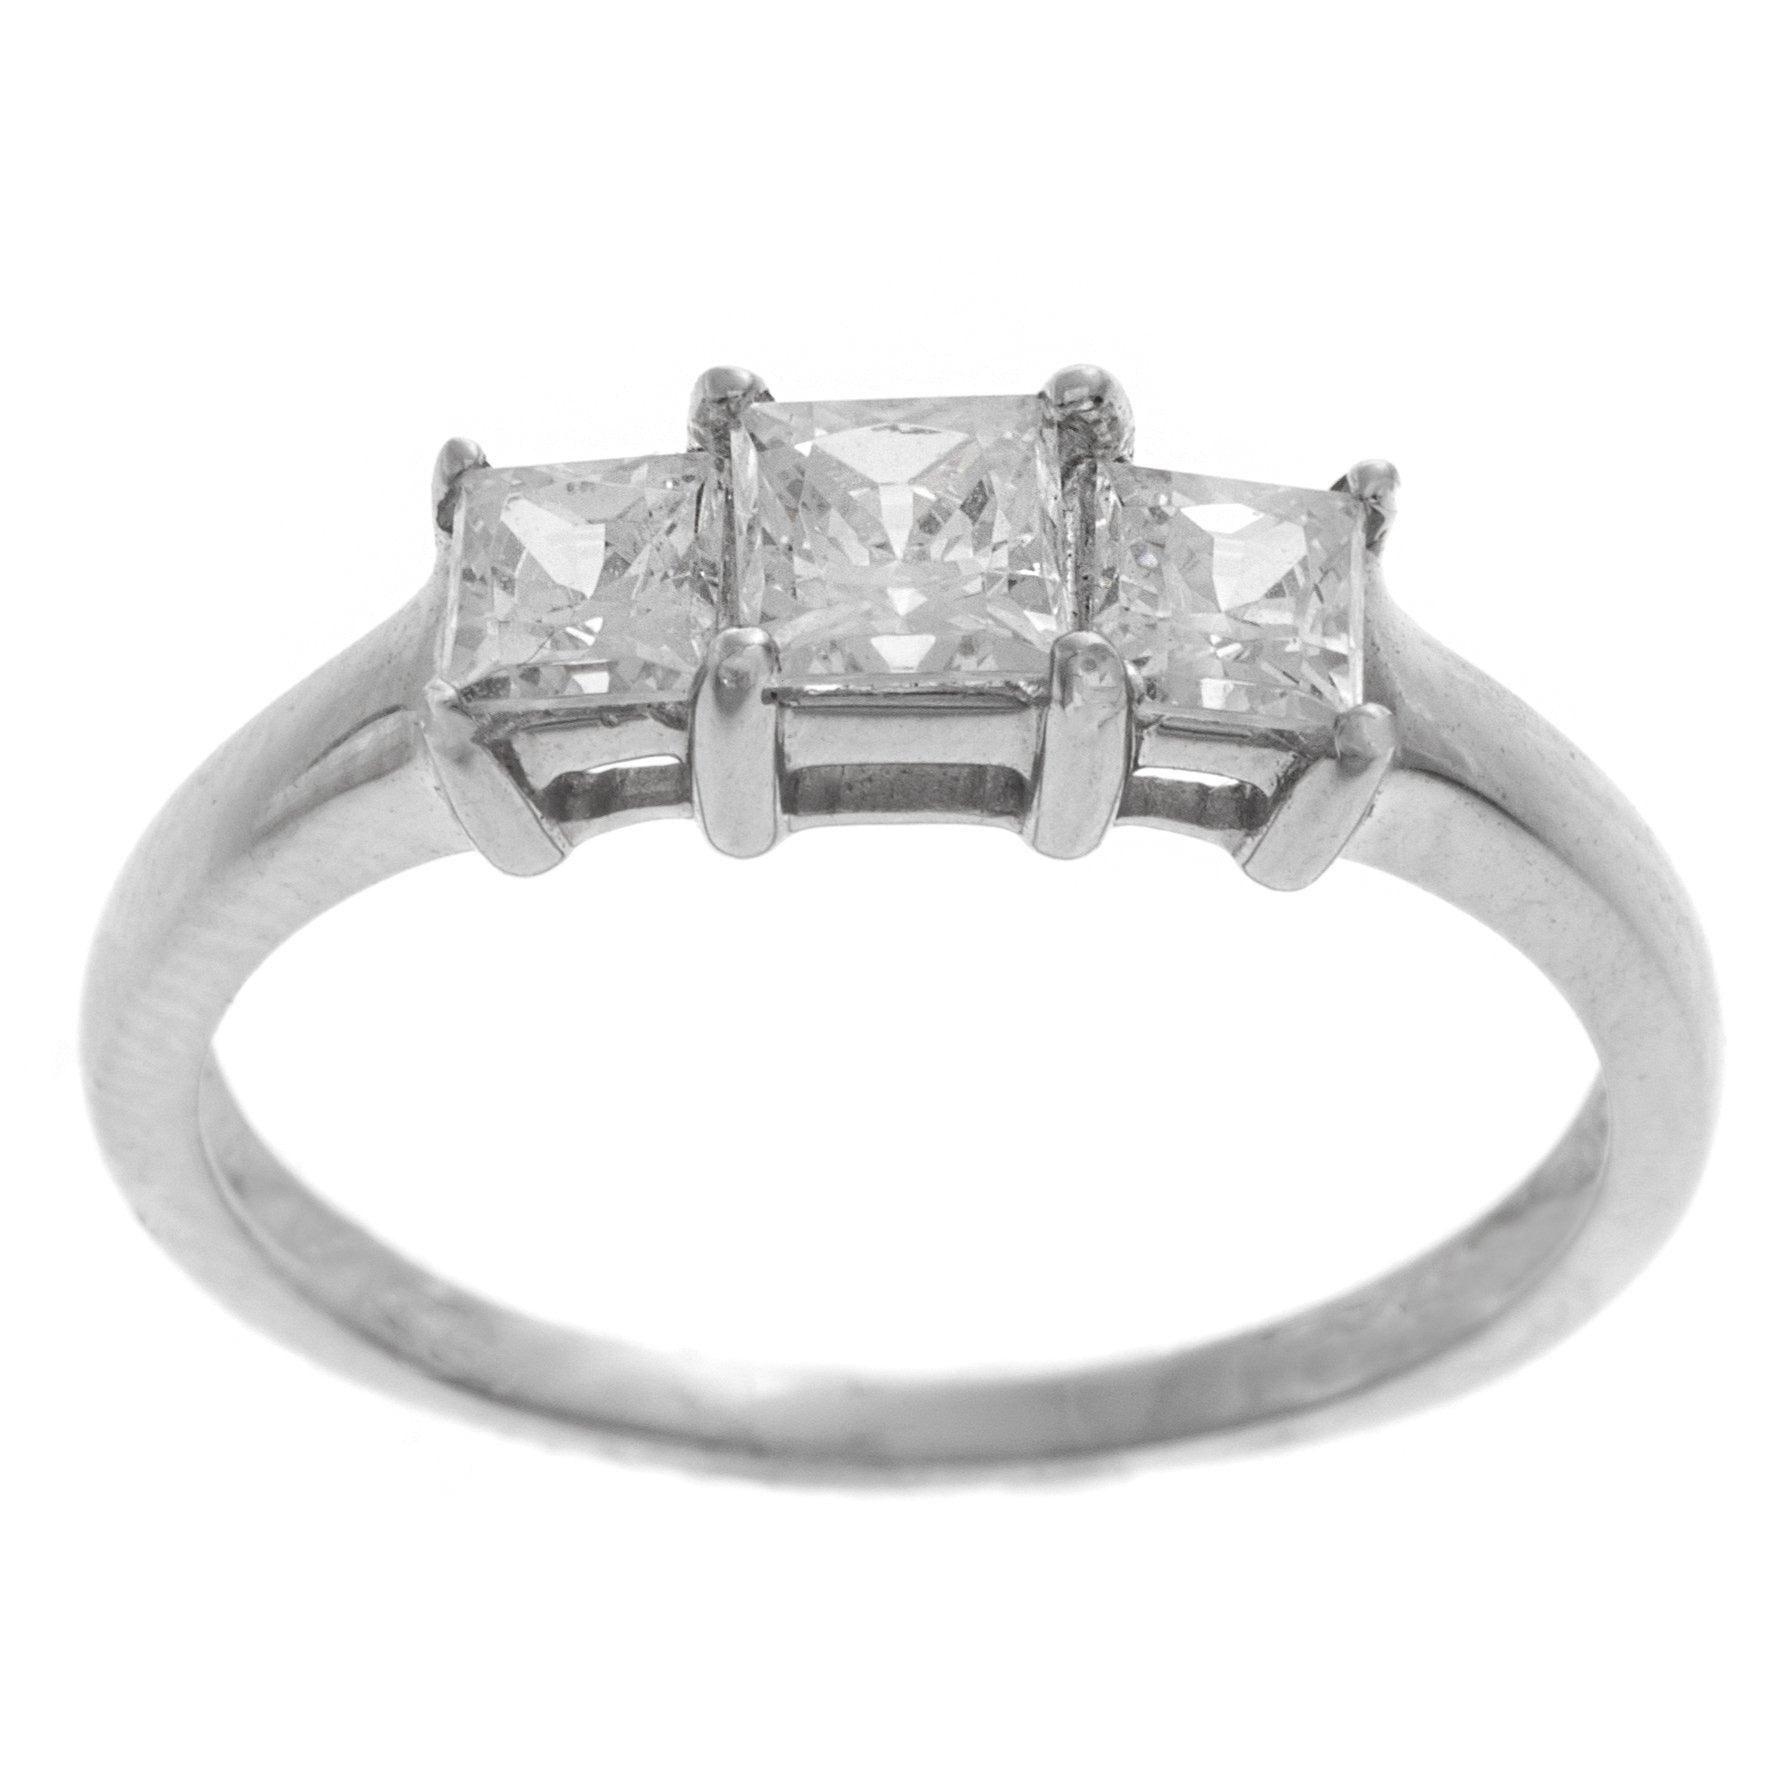 18ct White Gold Cubic Zirconia Trilogy Ring LR-2372 - Minar Jewellers